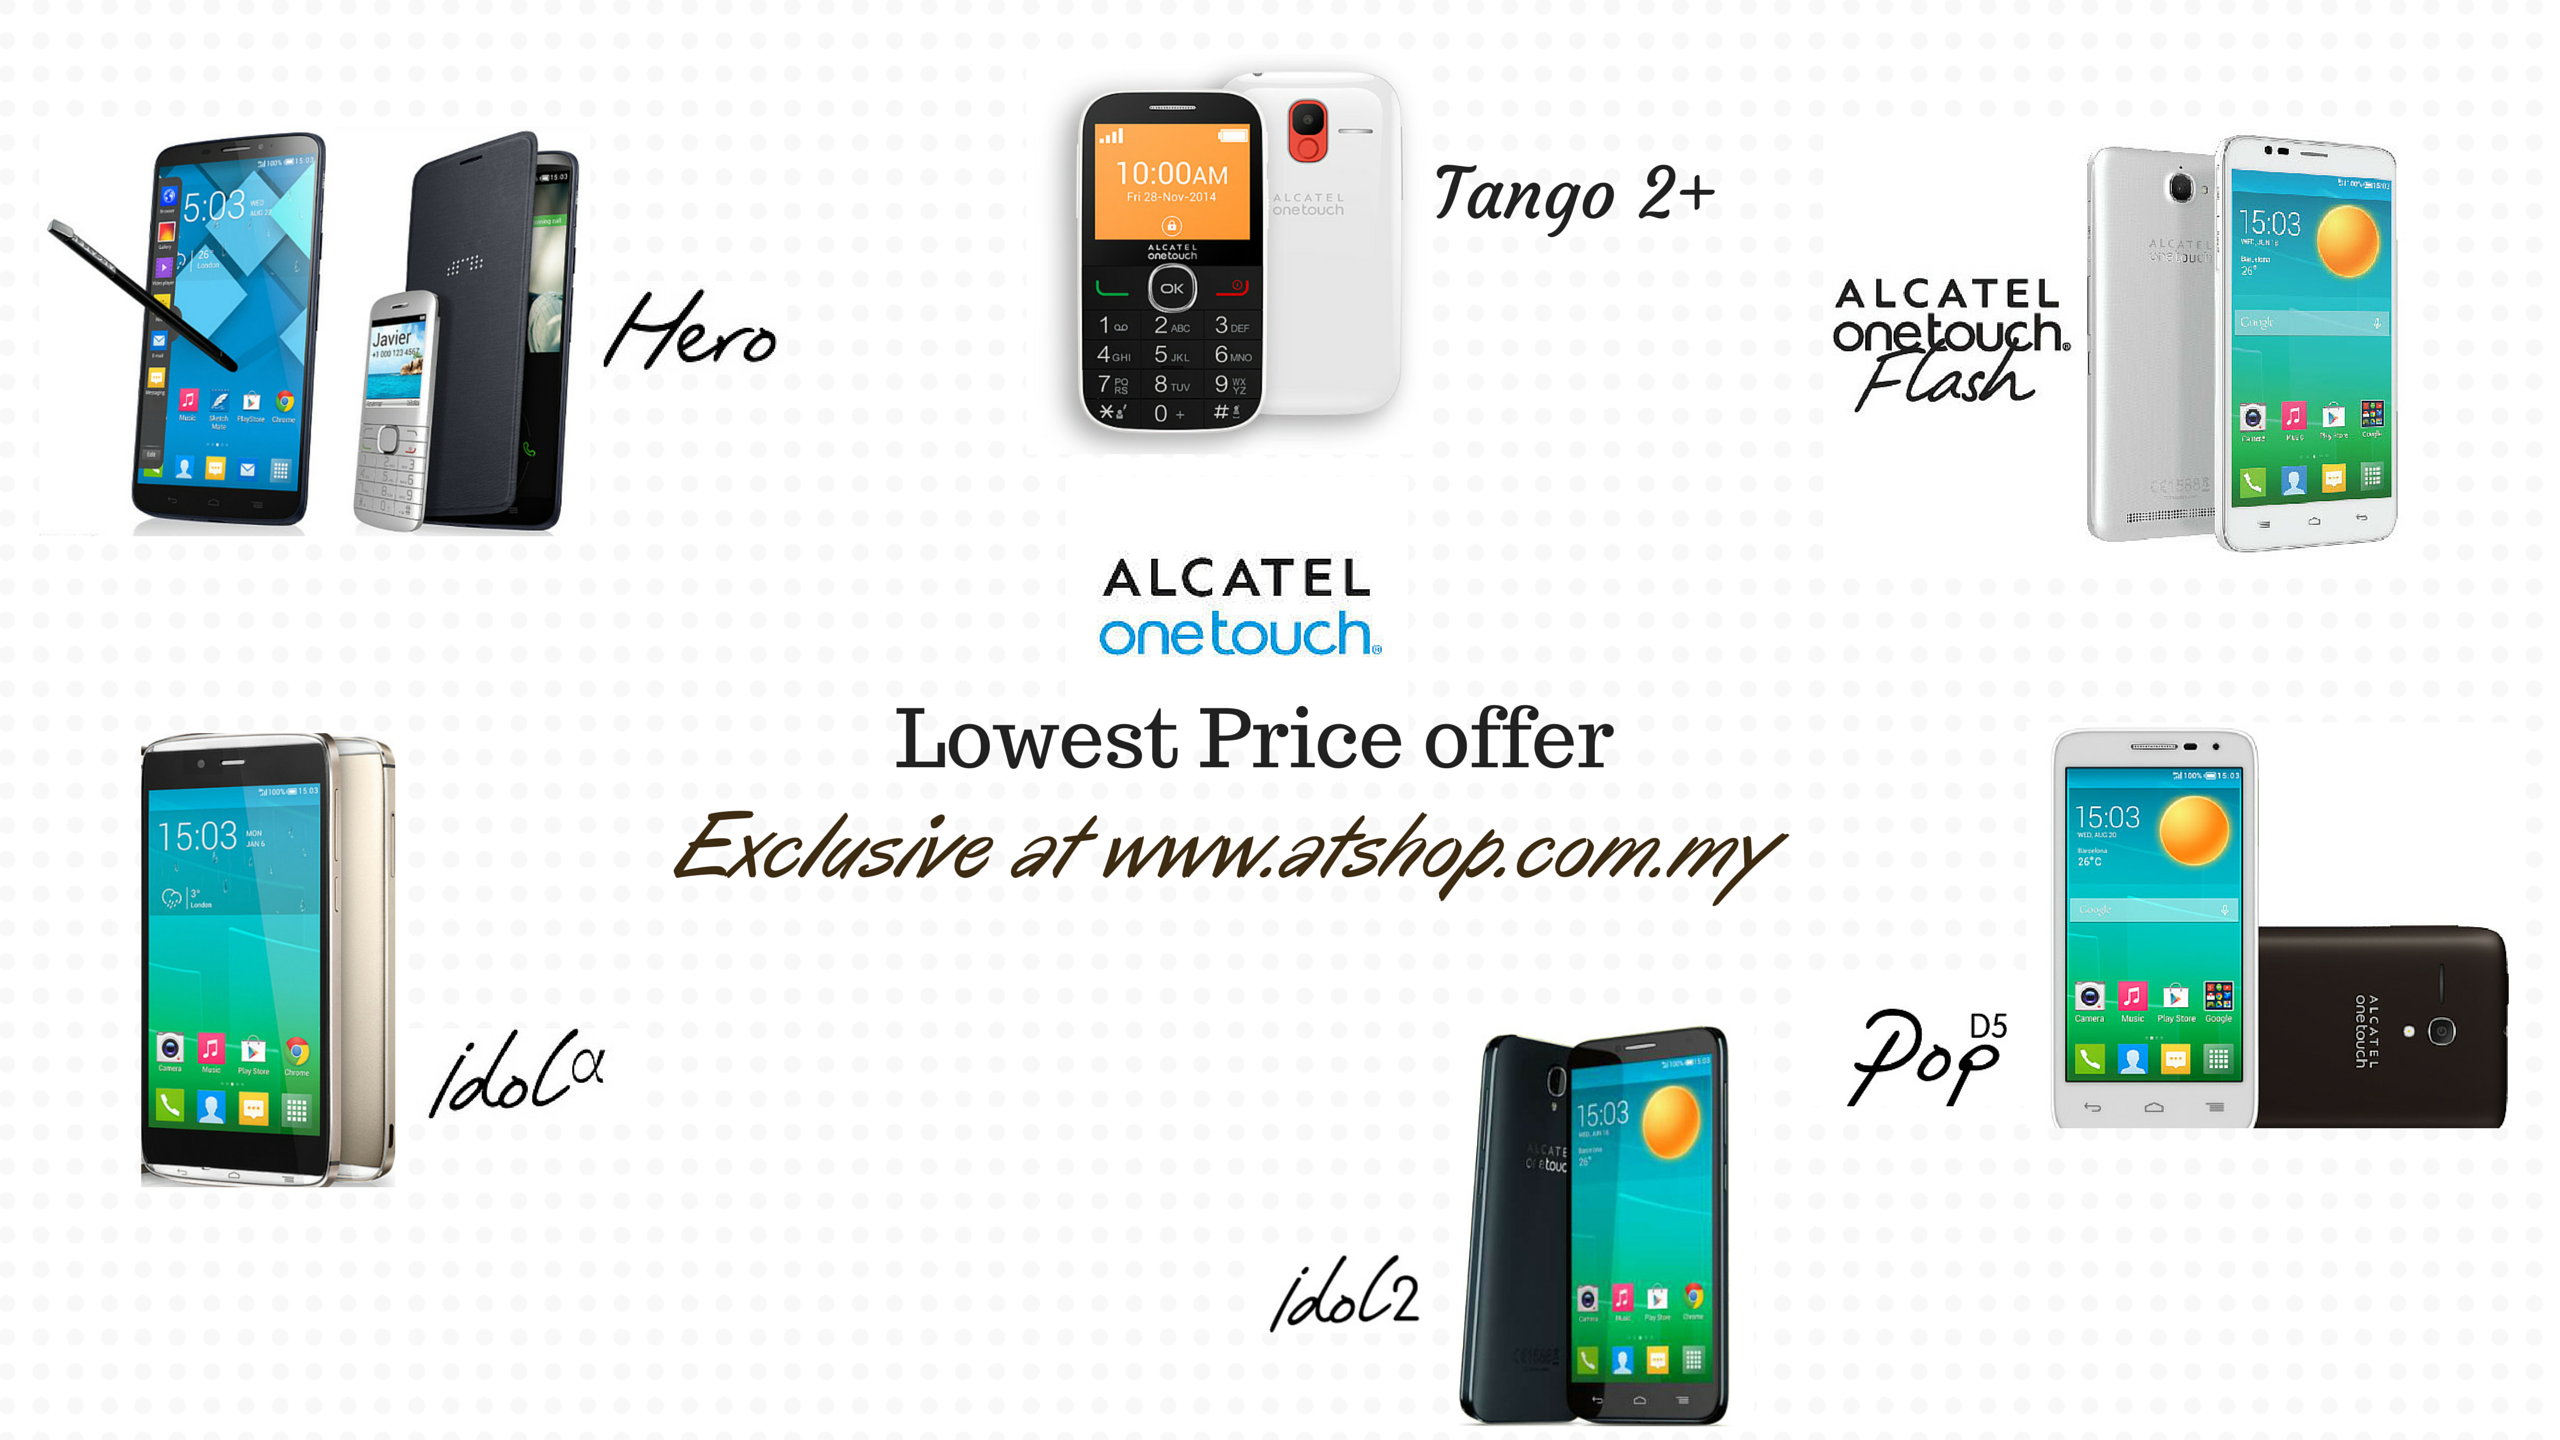 Shopping Alcatel onetouch Feature 